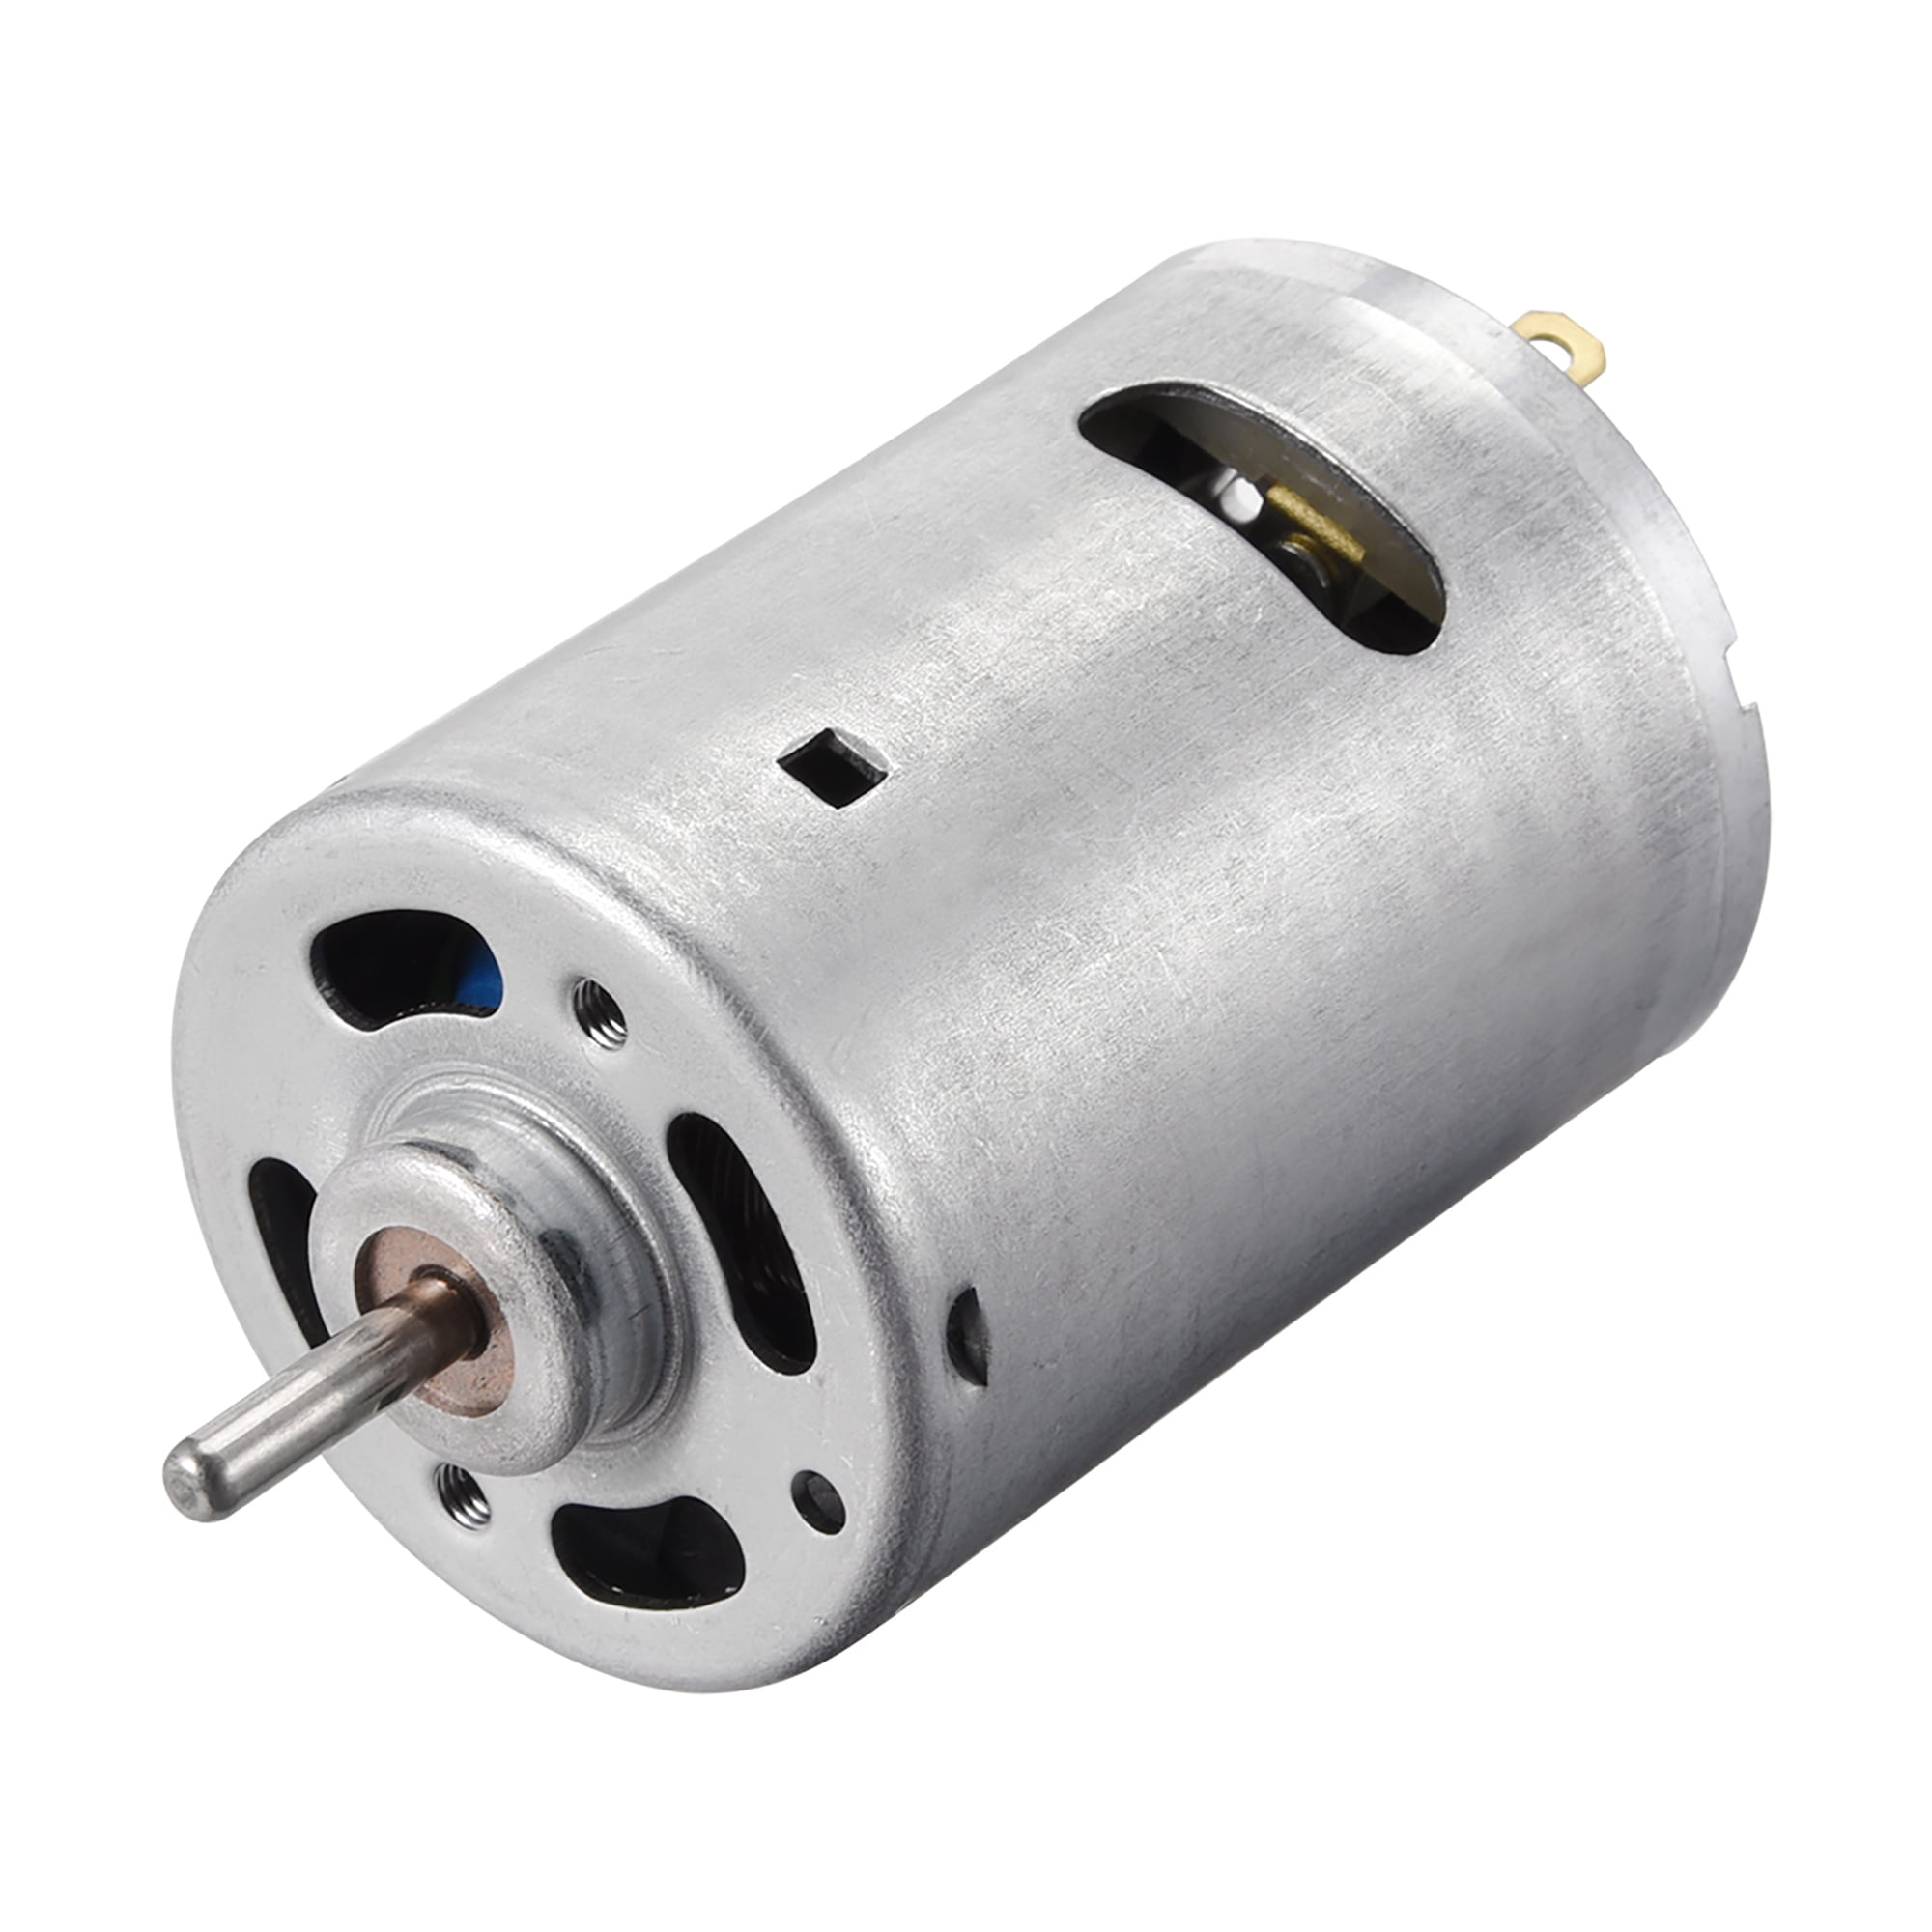 DC Motor 12V 10000RPM 0.4A Electric Motor Round Shaft, for RC Boat DIY 